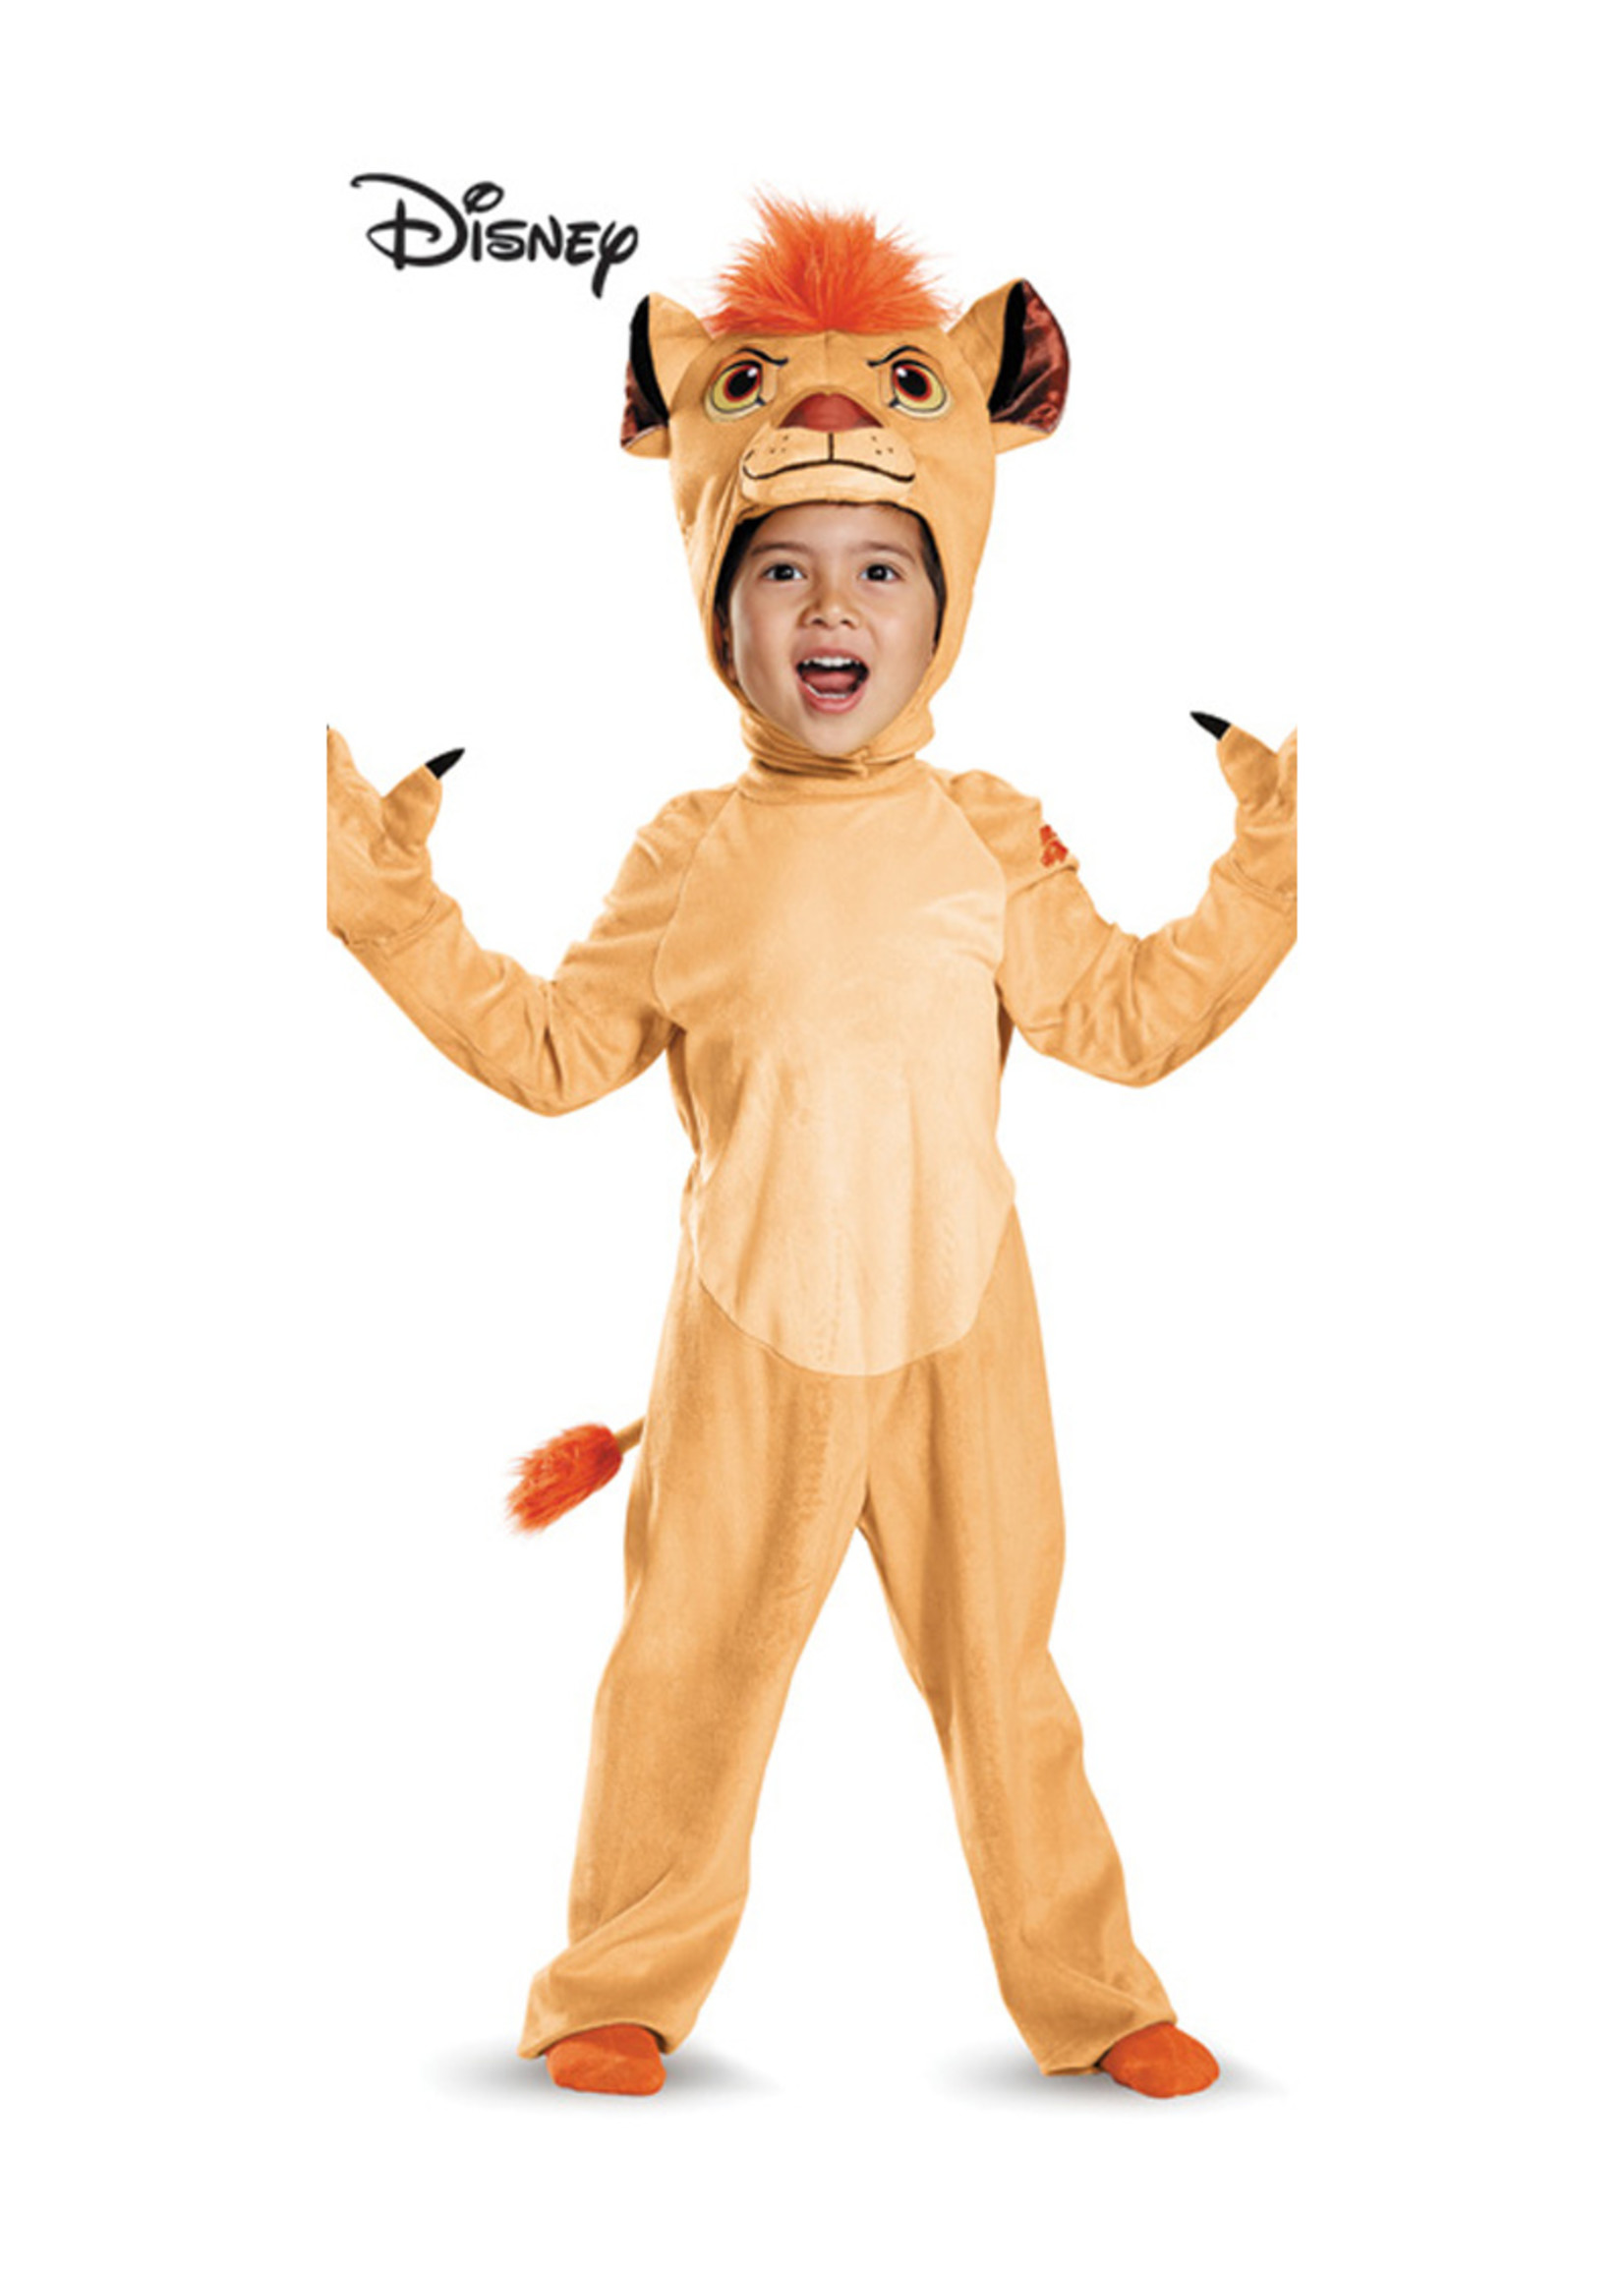 DISGUISE Kion - The Lion Guard Deluxe Costume - Toddler